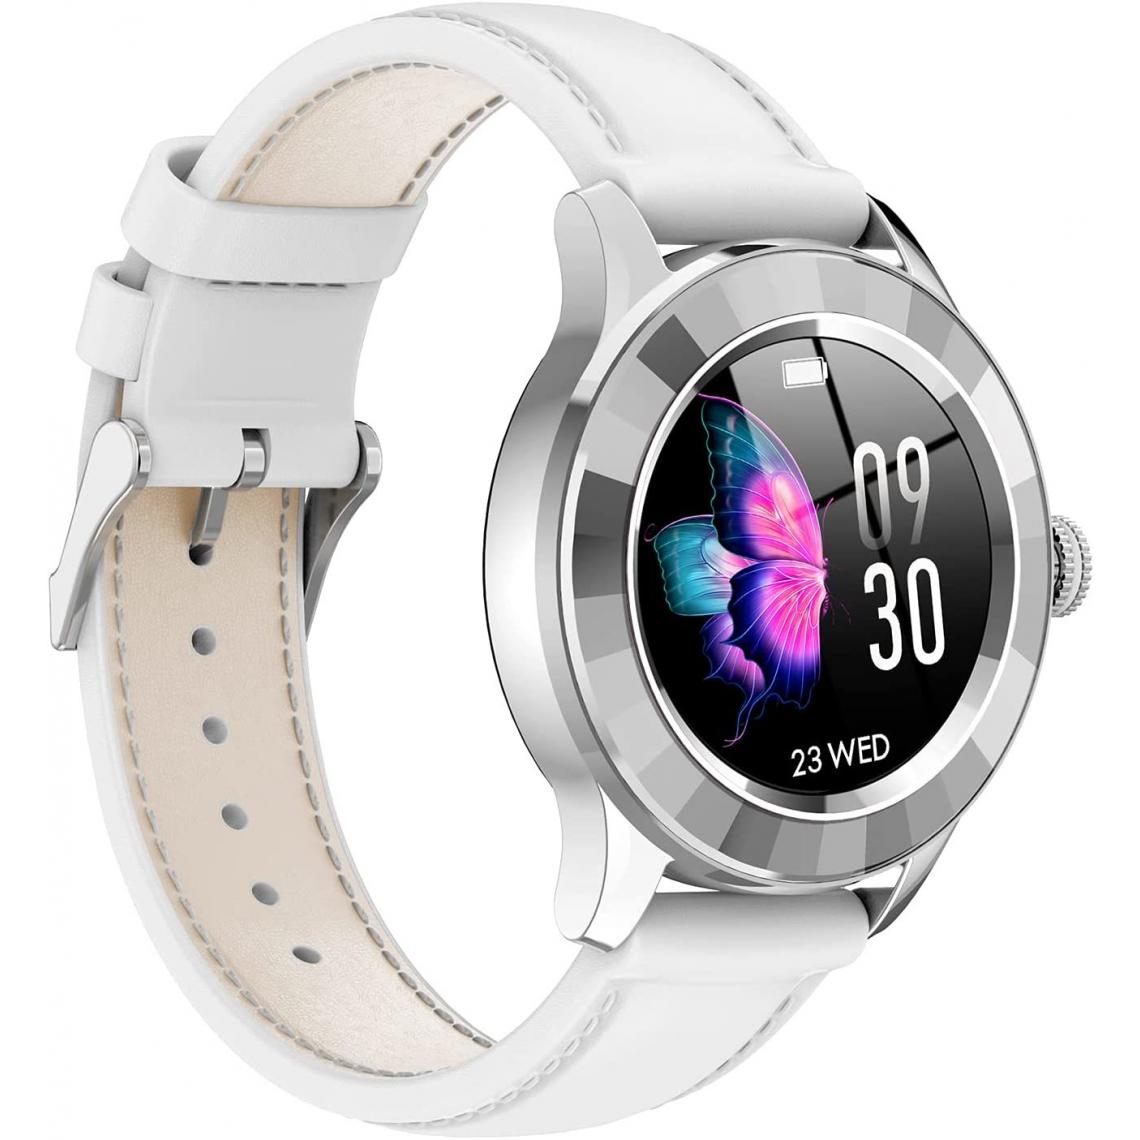 Chronotech Montres - Chronus Smart Watch women elegant high quality IP67 waterproof with fitness tracker, heart rate sleep monitor, calorie step counter(White) - Montre connectée